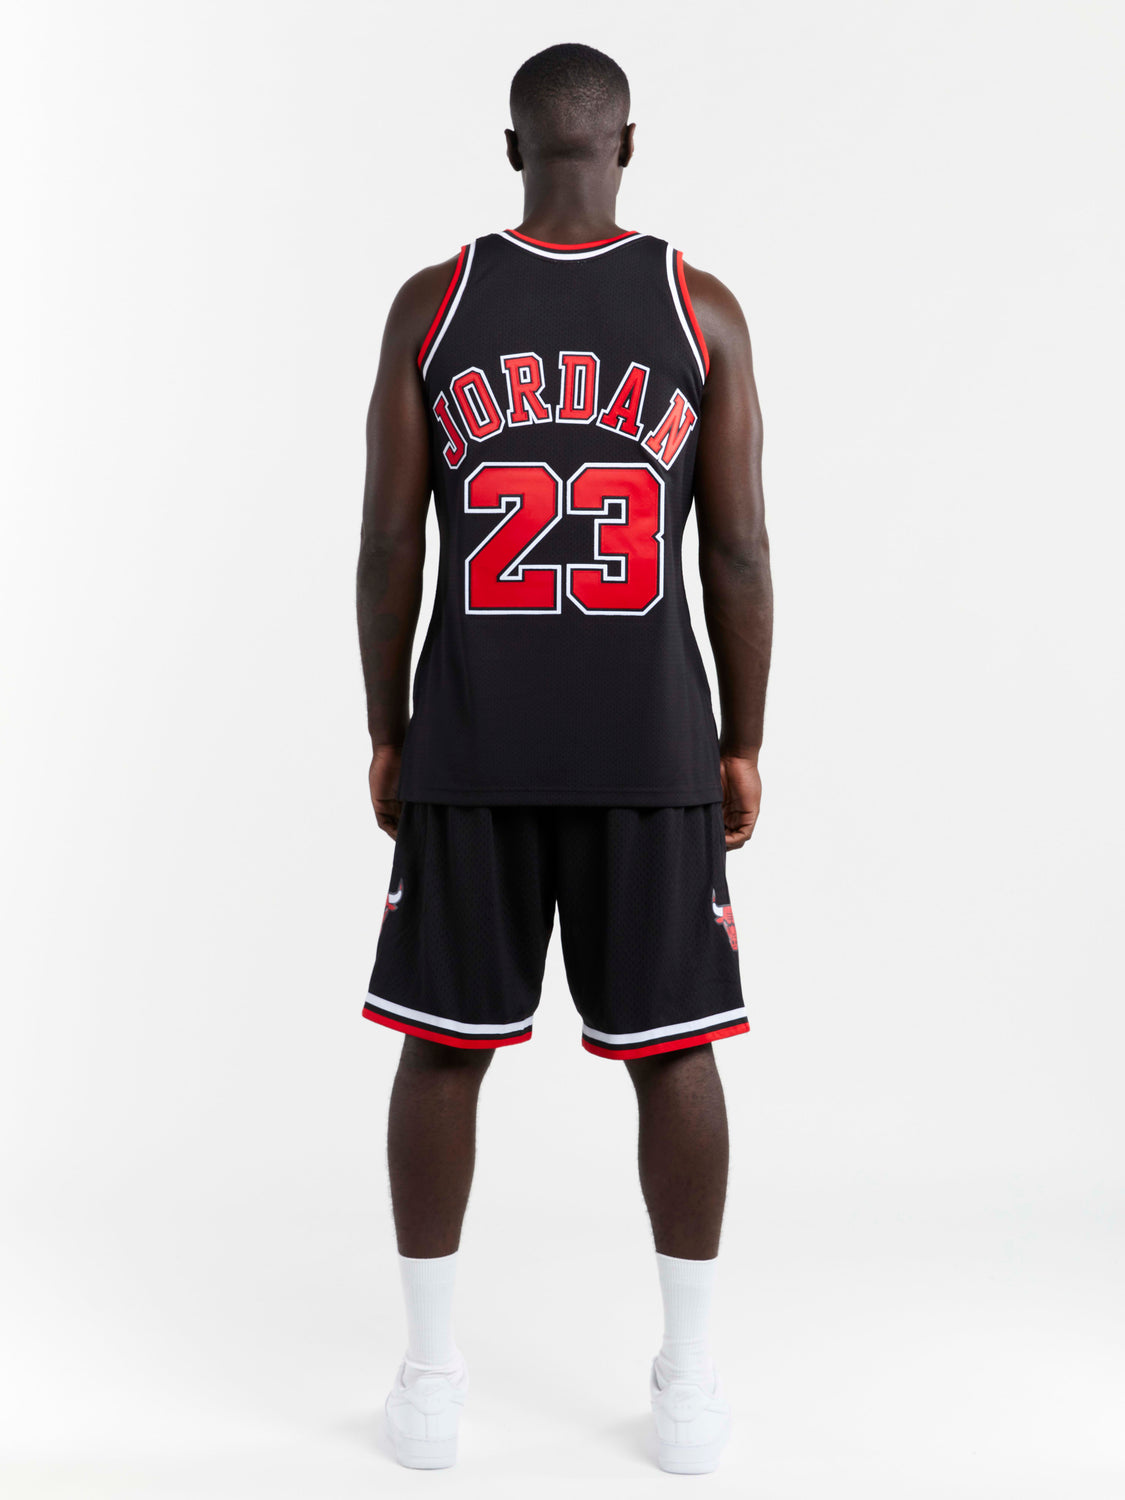 Authentic Jersey Chicago Bulls Road Finals 1995-96 Michael Jordan - Shop  Mitchell & Ness Authentic Jerseys and Replicas Mitchell & Ness Nostalgia Co.